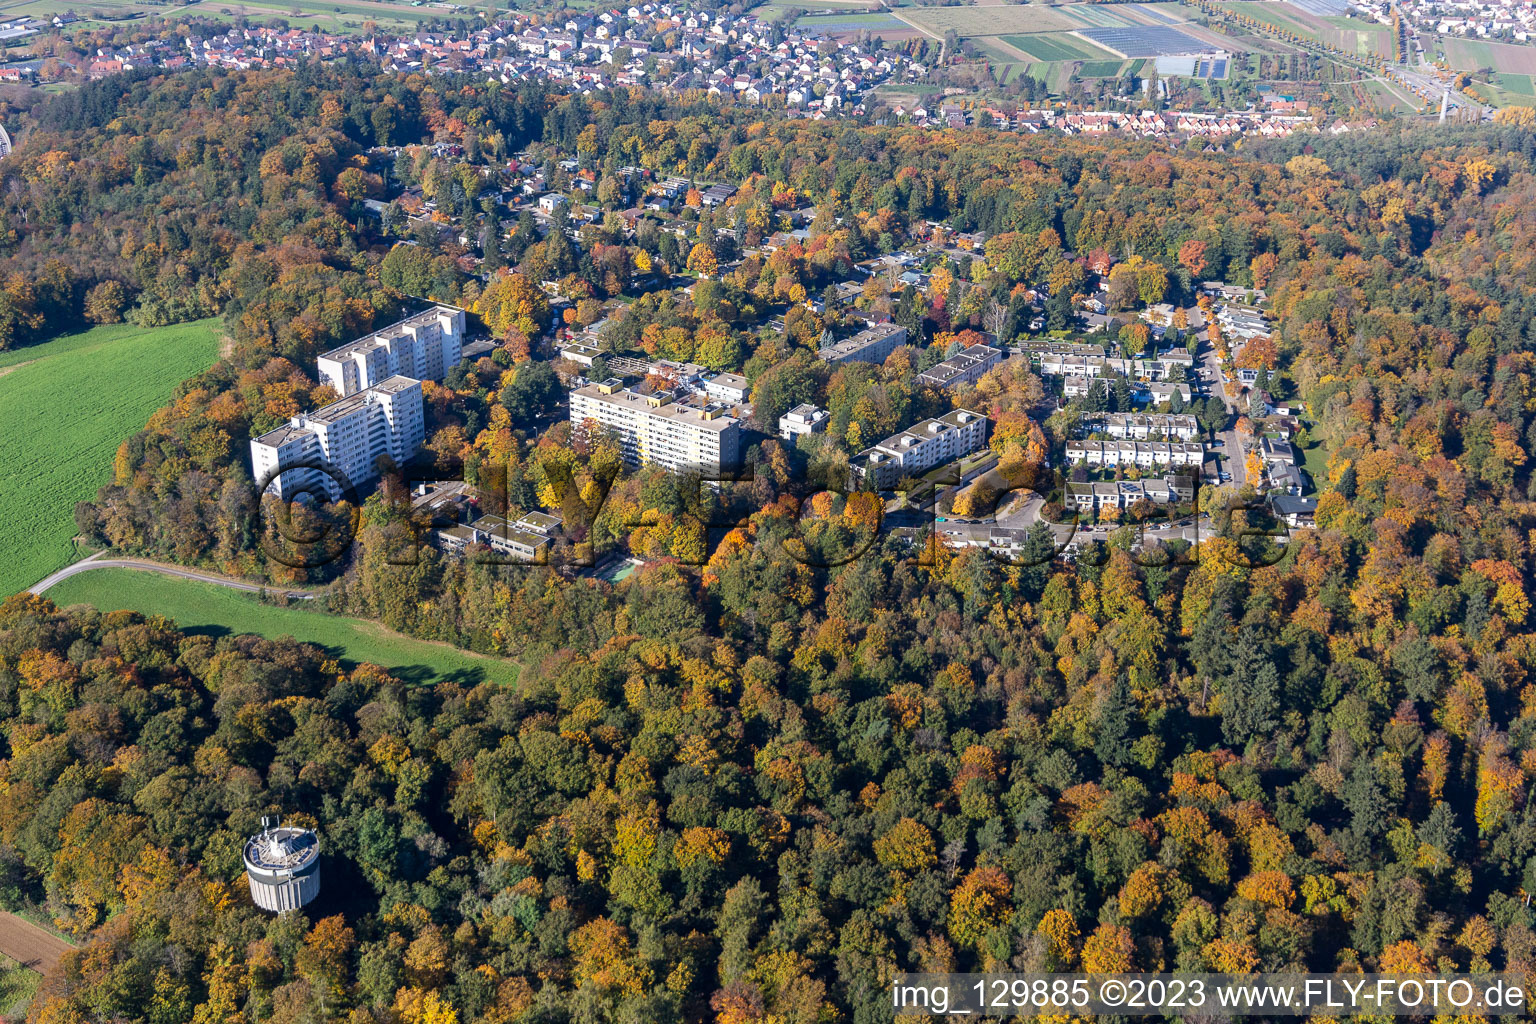 Mountain forest settlement in the district Durlach in Karlsruhe in the state Baden-Wuerttemberg, Germany